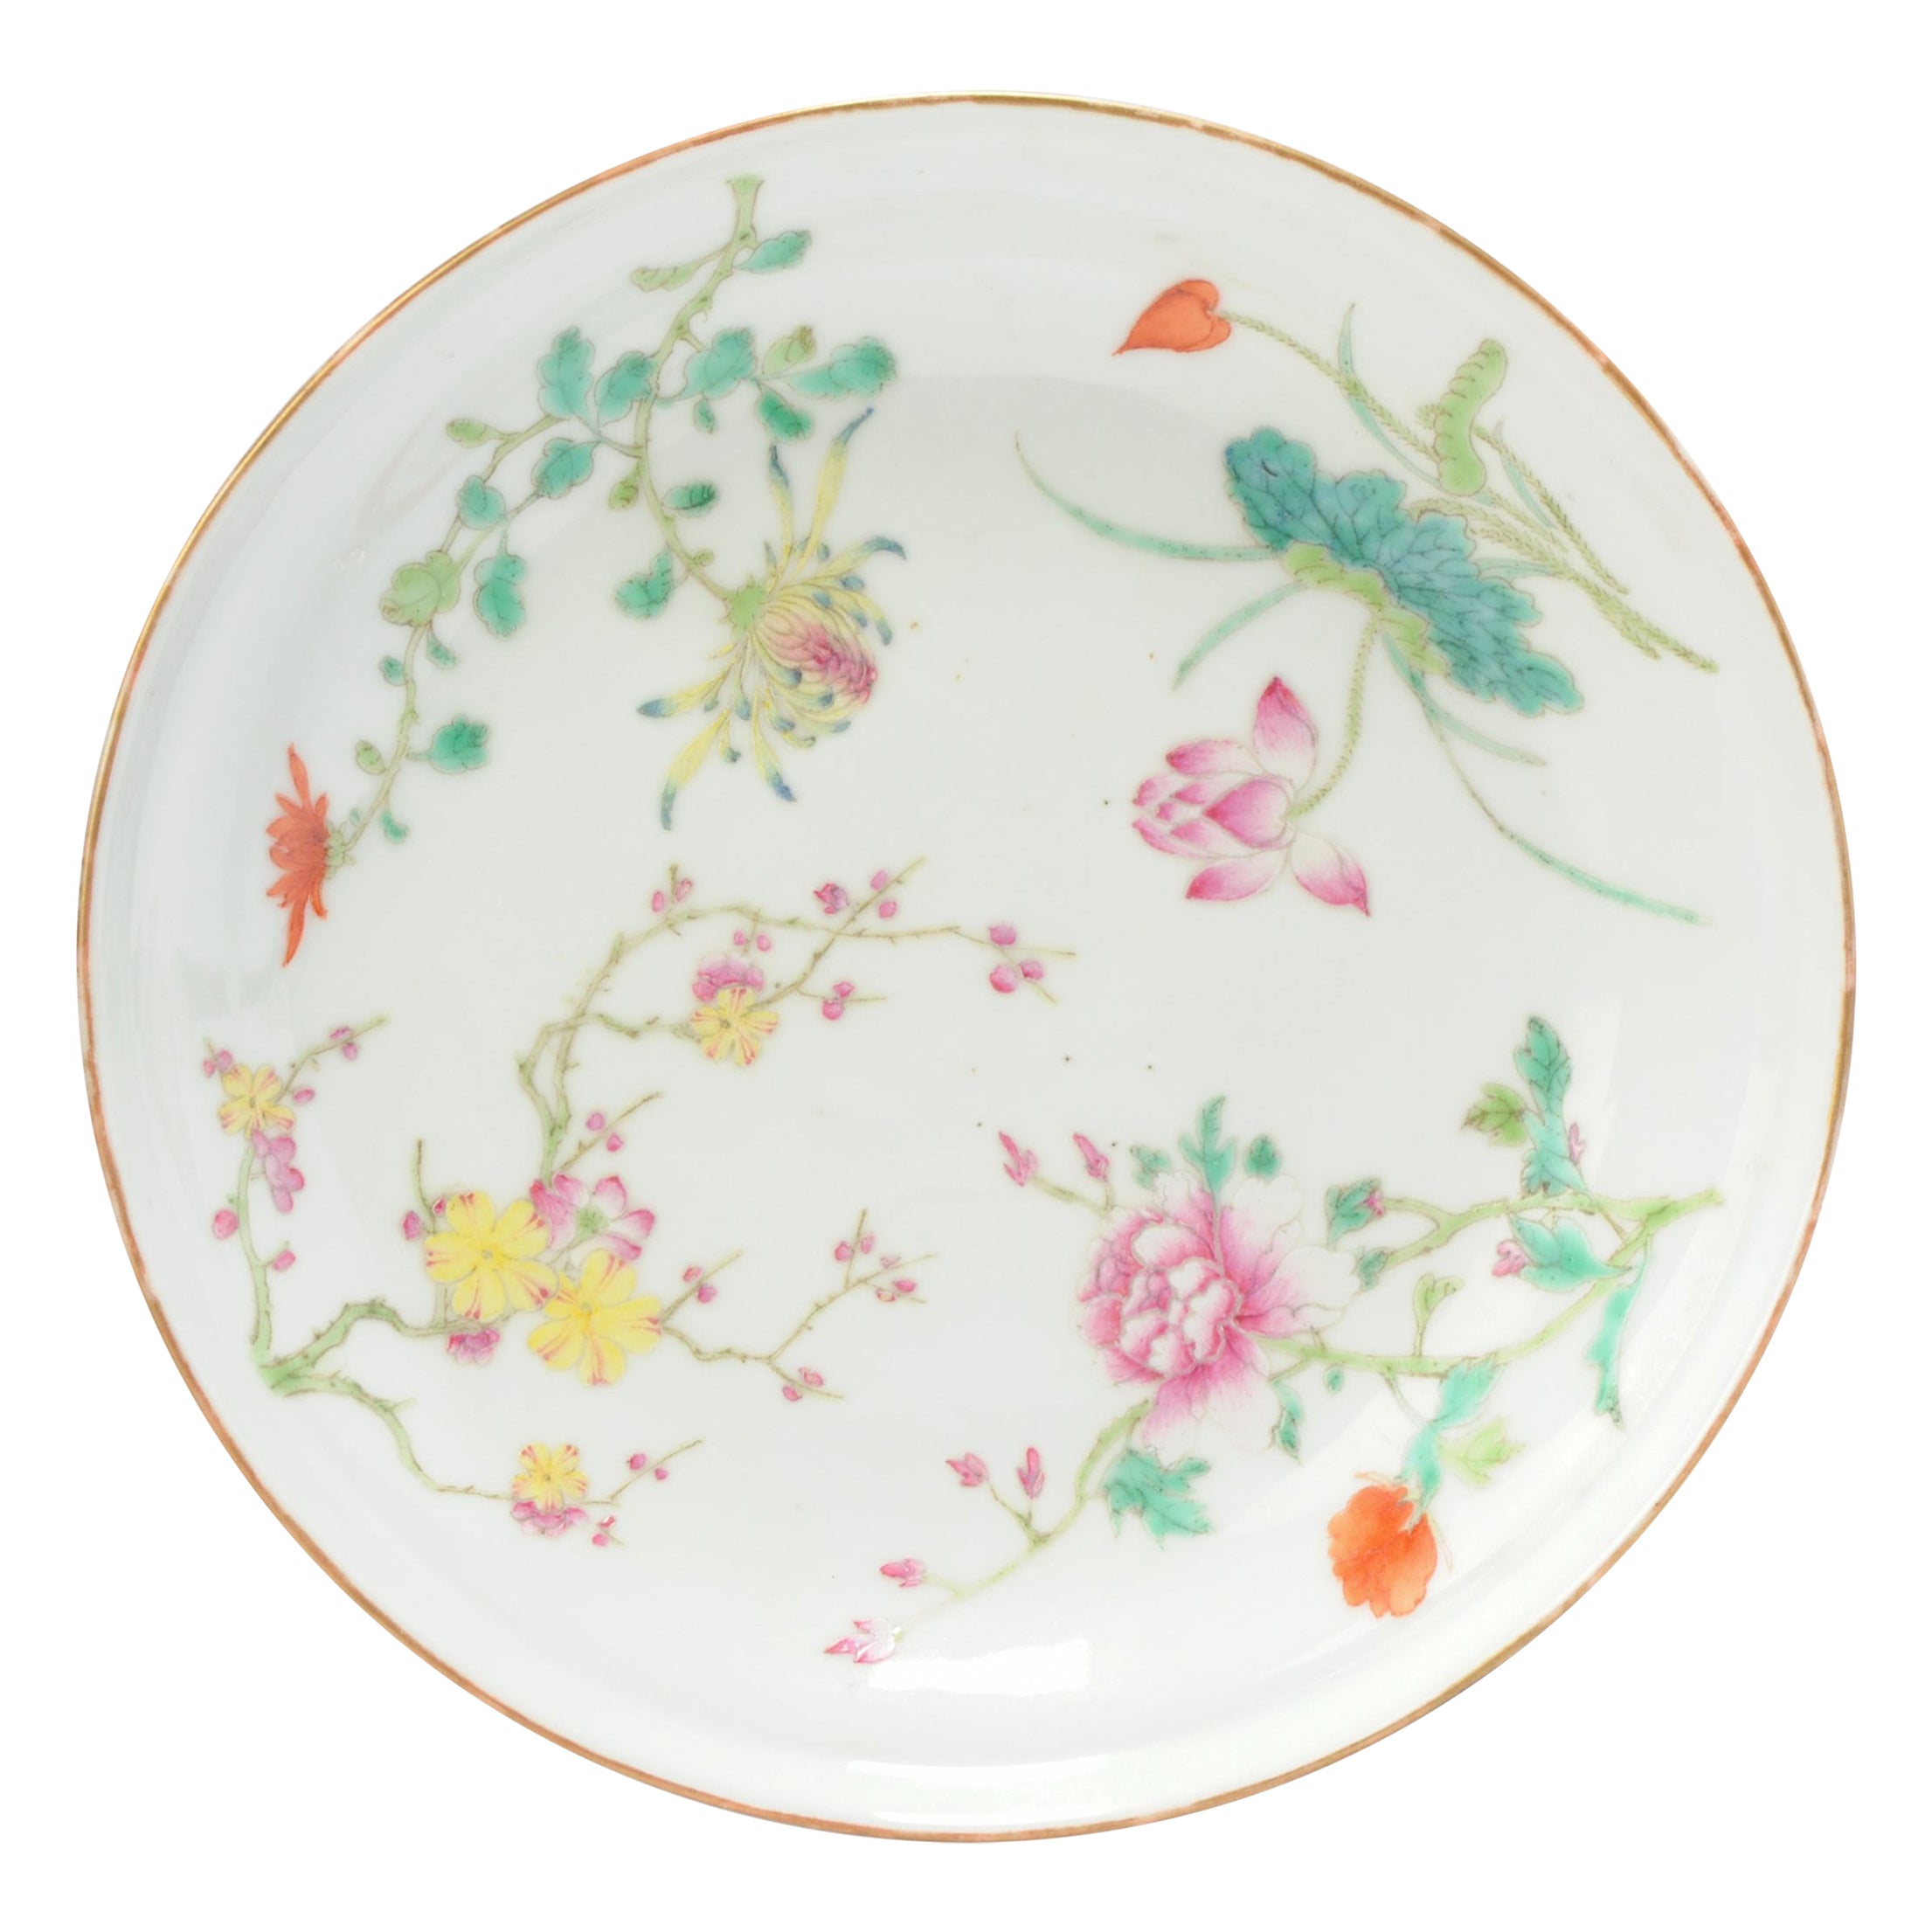 Superior Quality Guangxu or Minguo Chinese Porcelain Tazza with Flowers